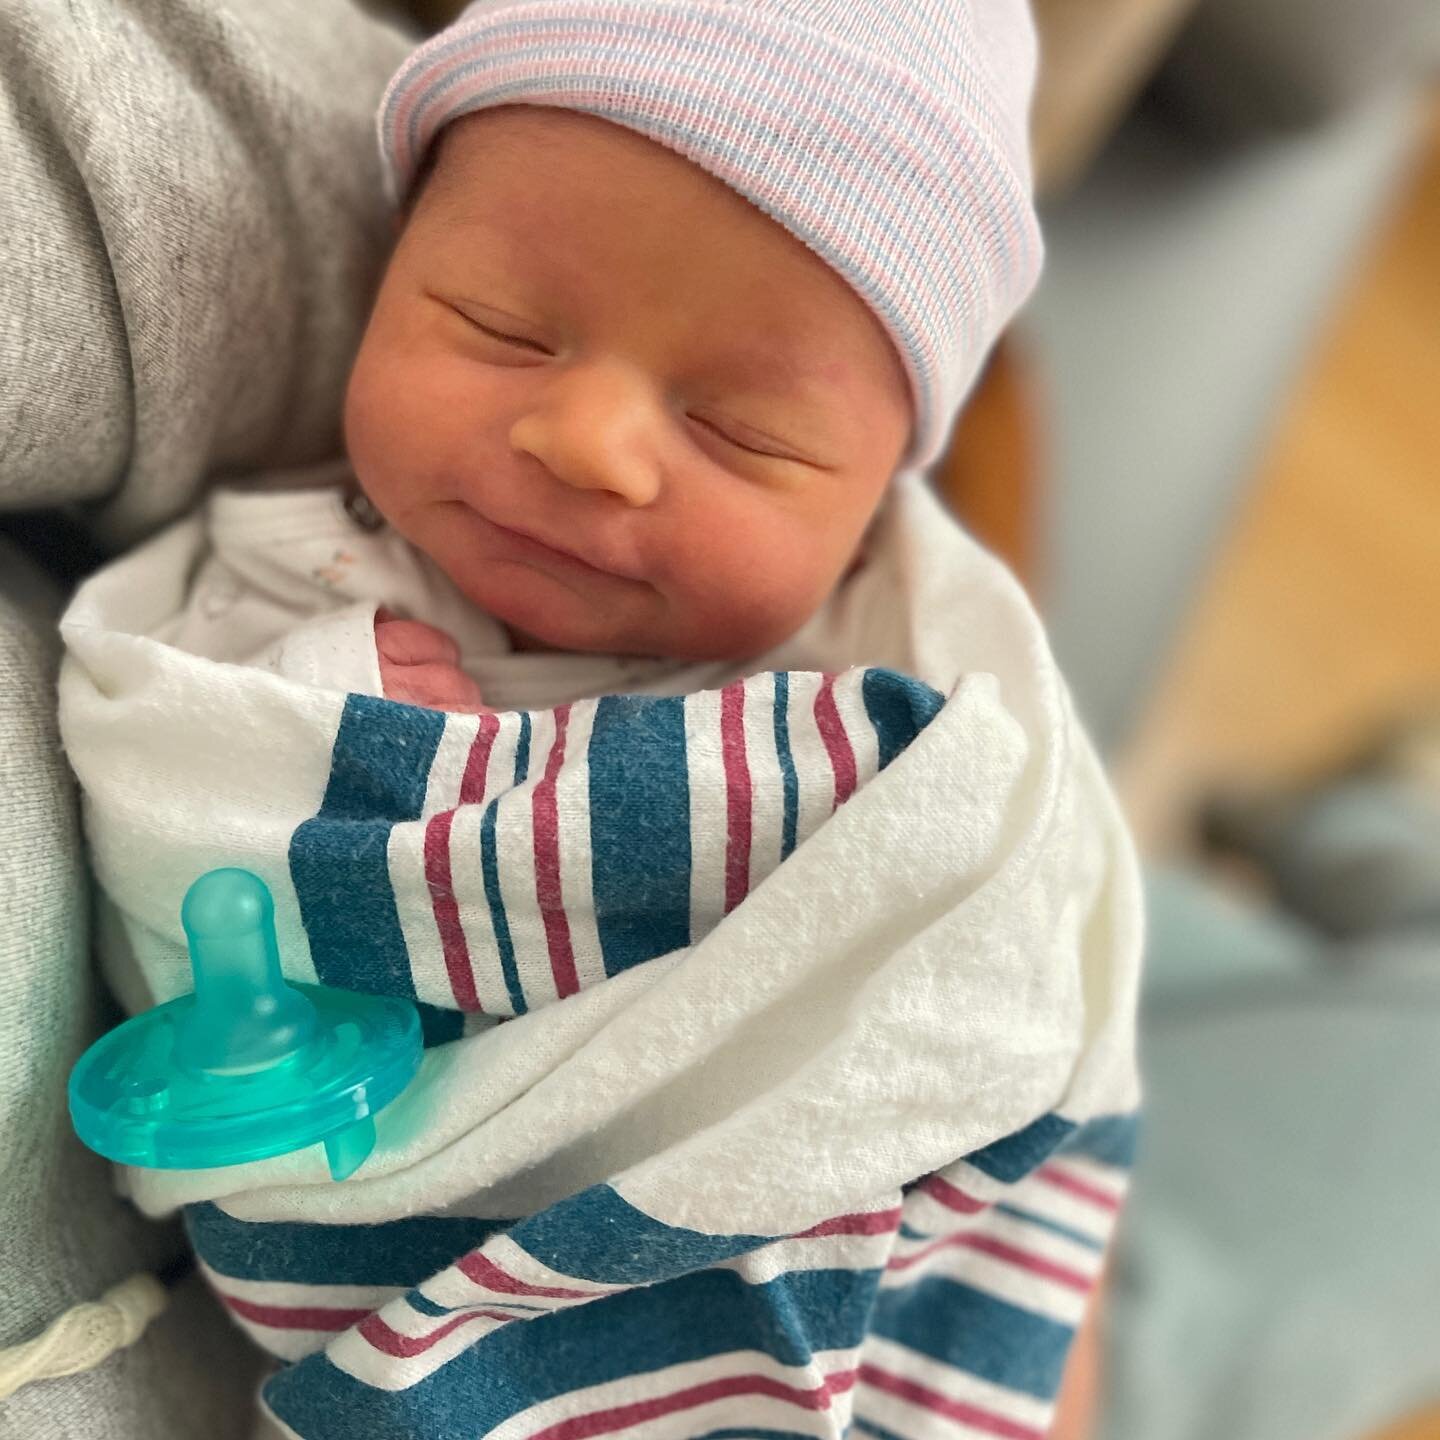 I am so late to announce the arrival of our new grandson Jack! He is just over 2 weeks old now and we are so grateful for another healthy,adorable grand baby. Sonny is proving to be a great big brother. Congratulations to Jordan and Whitnee!! 👏👏🎉❤